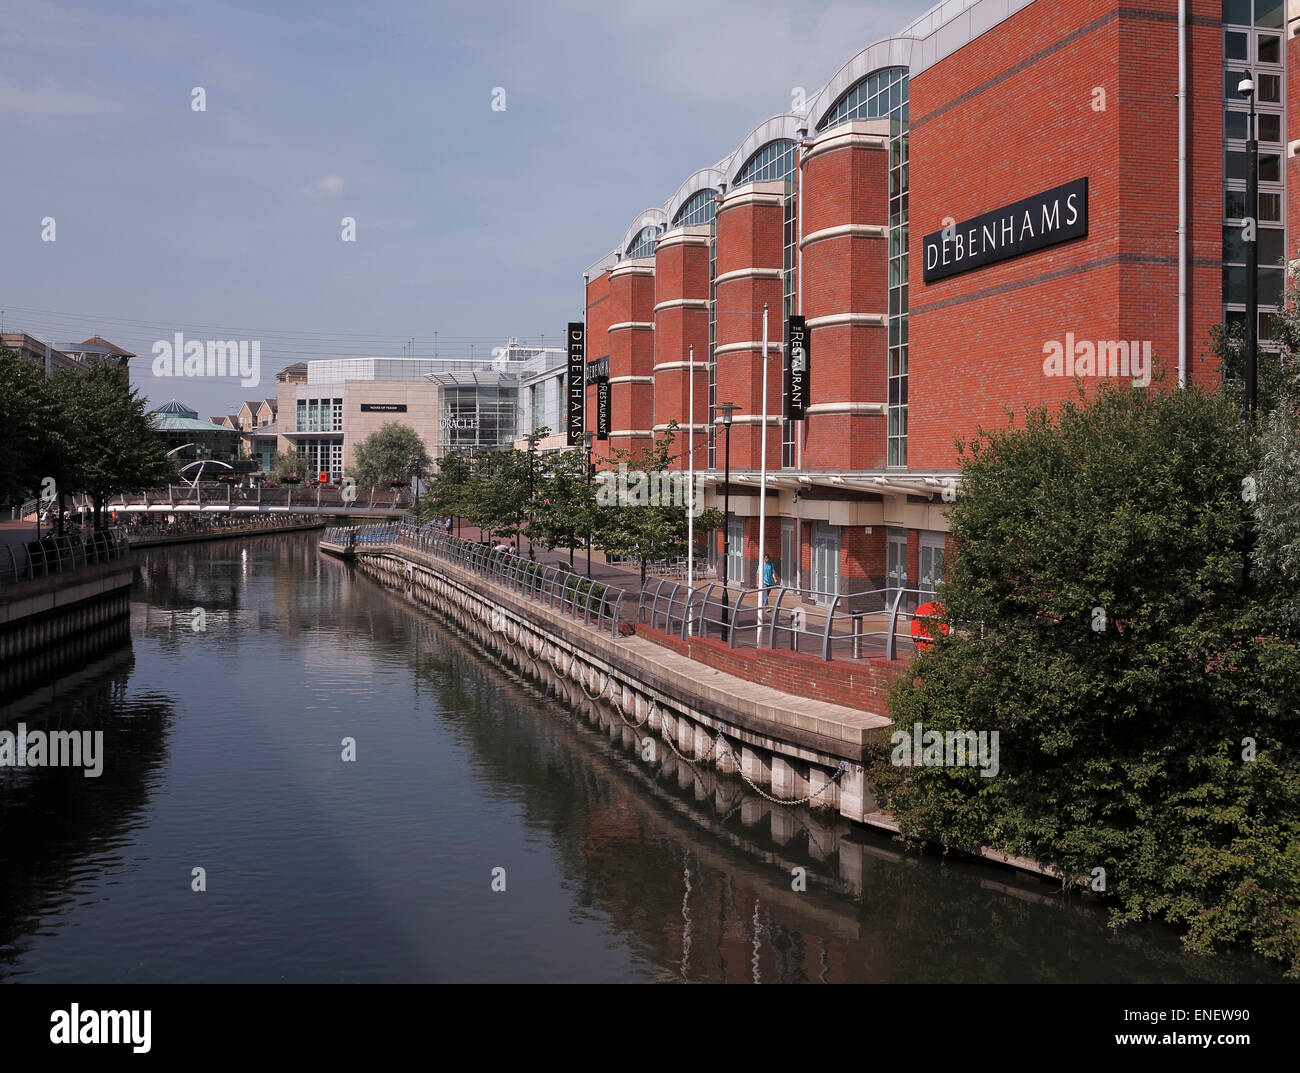 Debenham's at The Oracle Shopping Centre on the River Kennet Reading Berkshire England UK Stock Photo